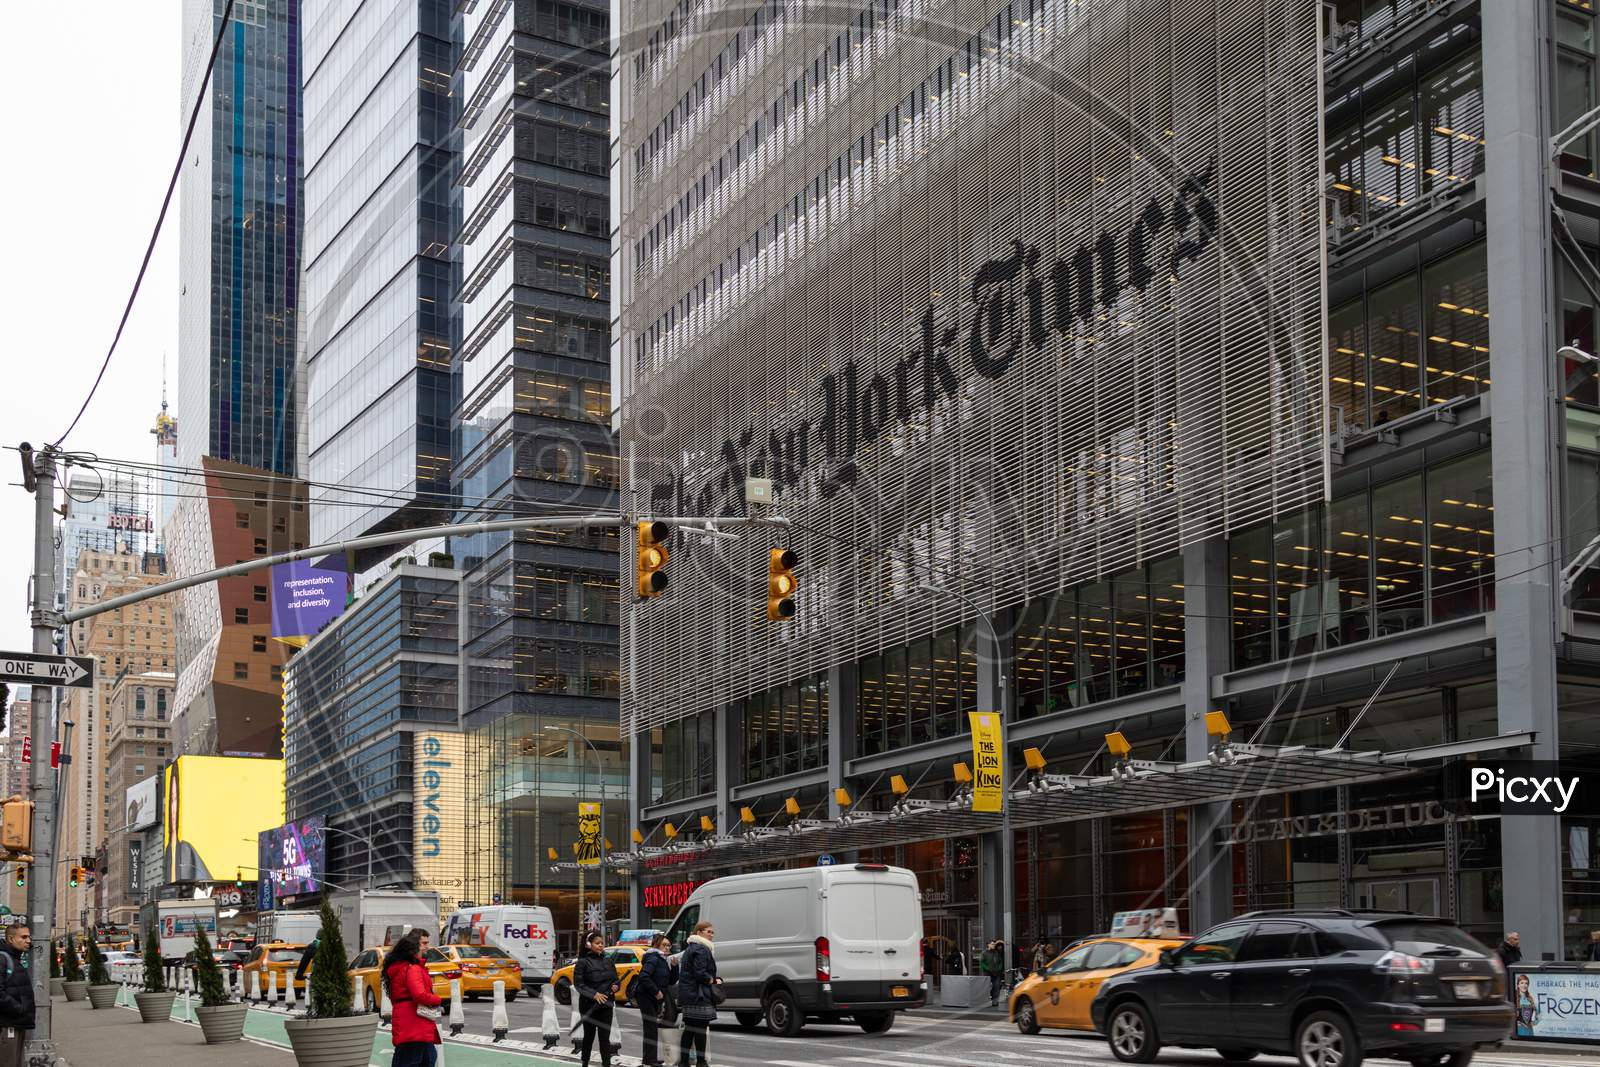 The New York Times newspaper headquarters building in Eighth Avenue; 40th & 41st Street exterior daylight view with people and cars in the street